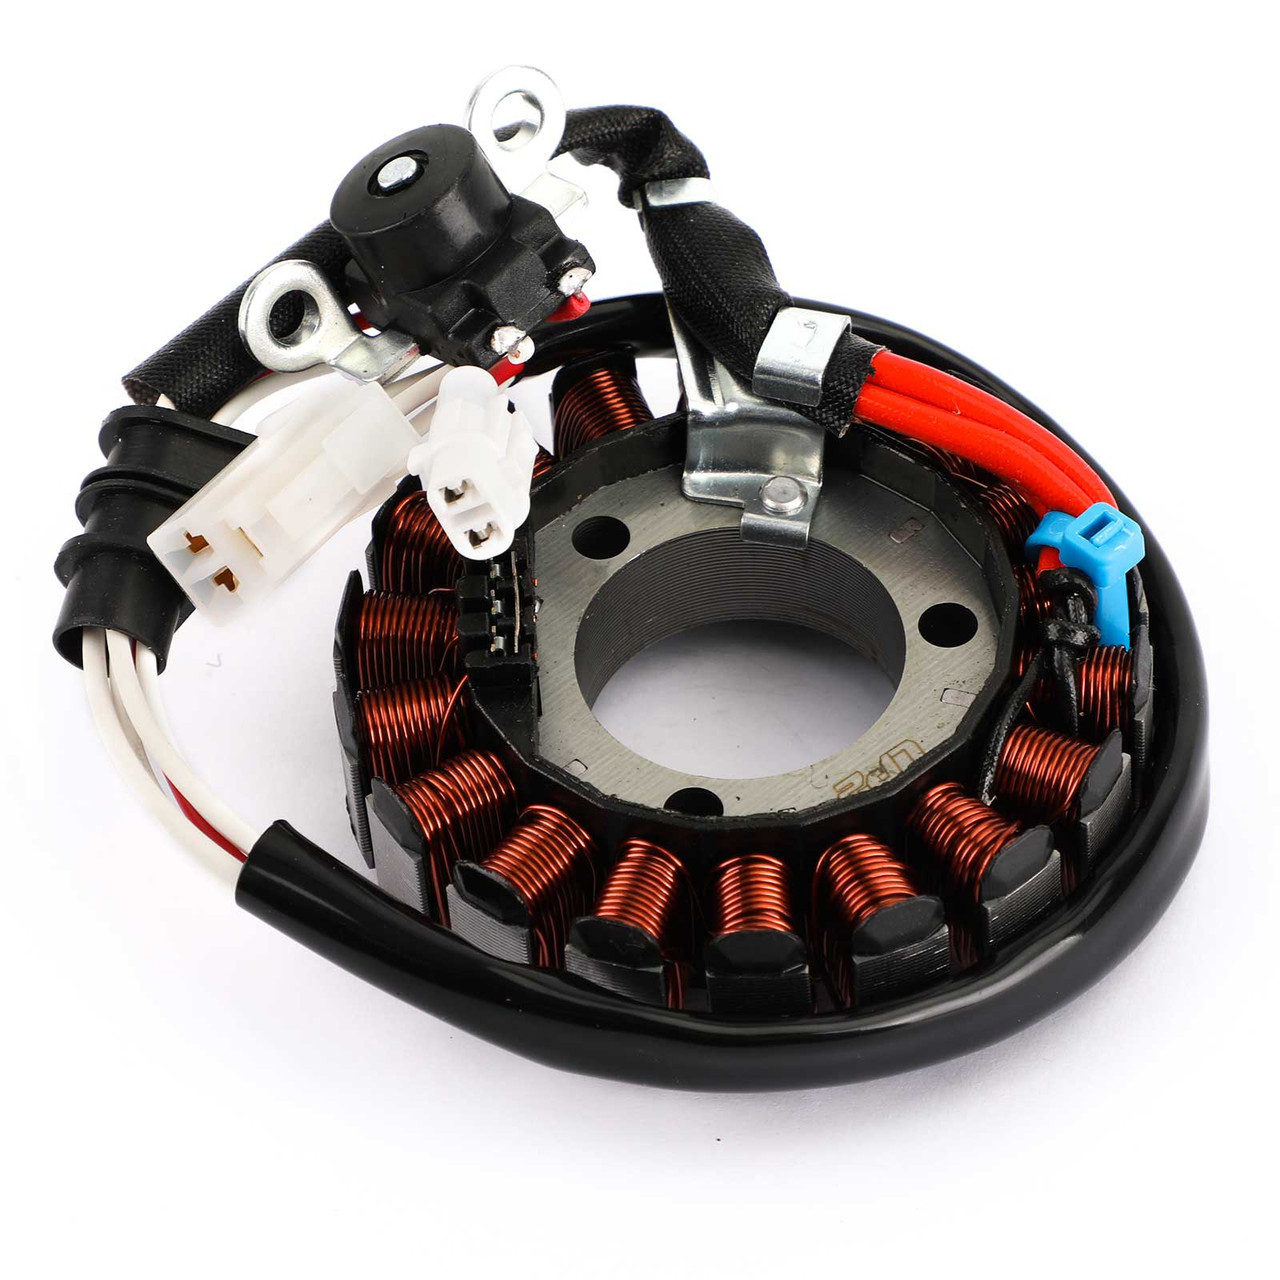 Magneto Generator Engine Stator Rotor Coil Fit For Yamaha MT125 YZF R125 15-19 WR125R/X 09-14